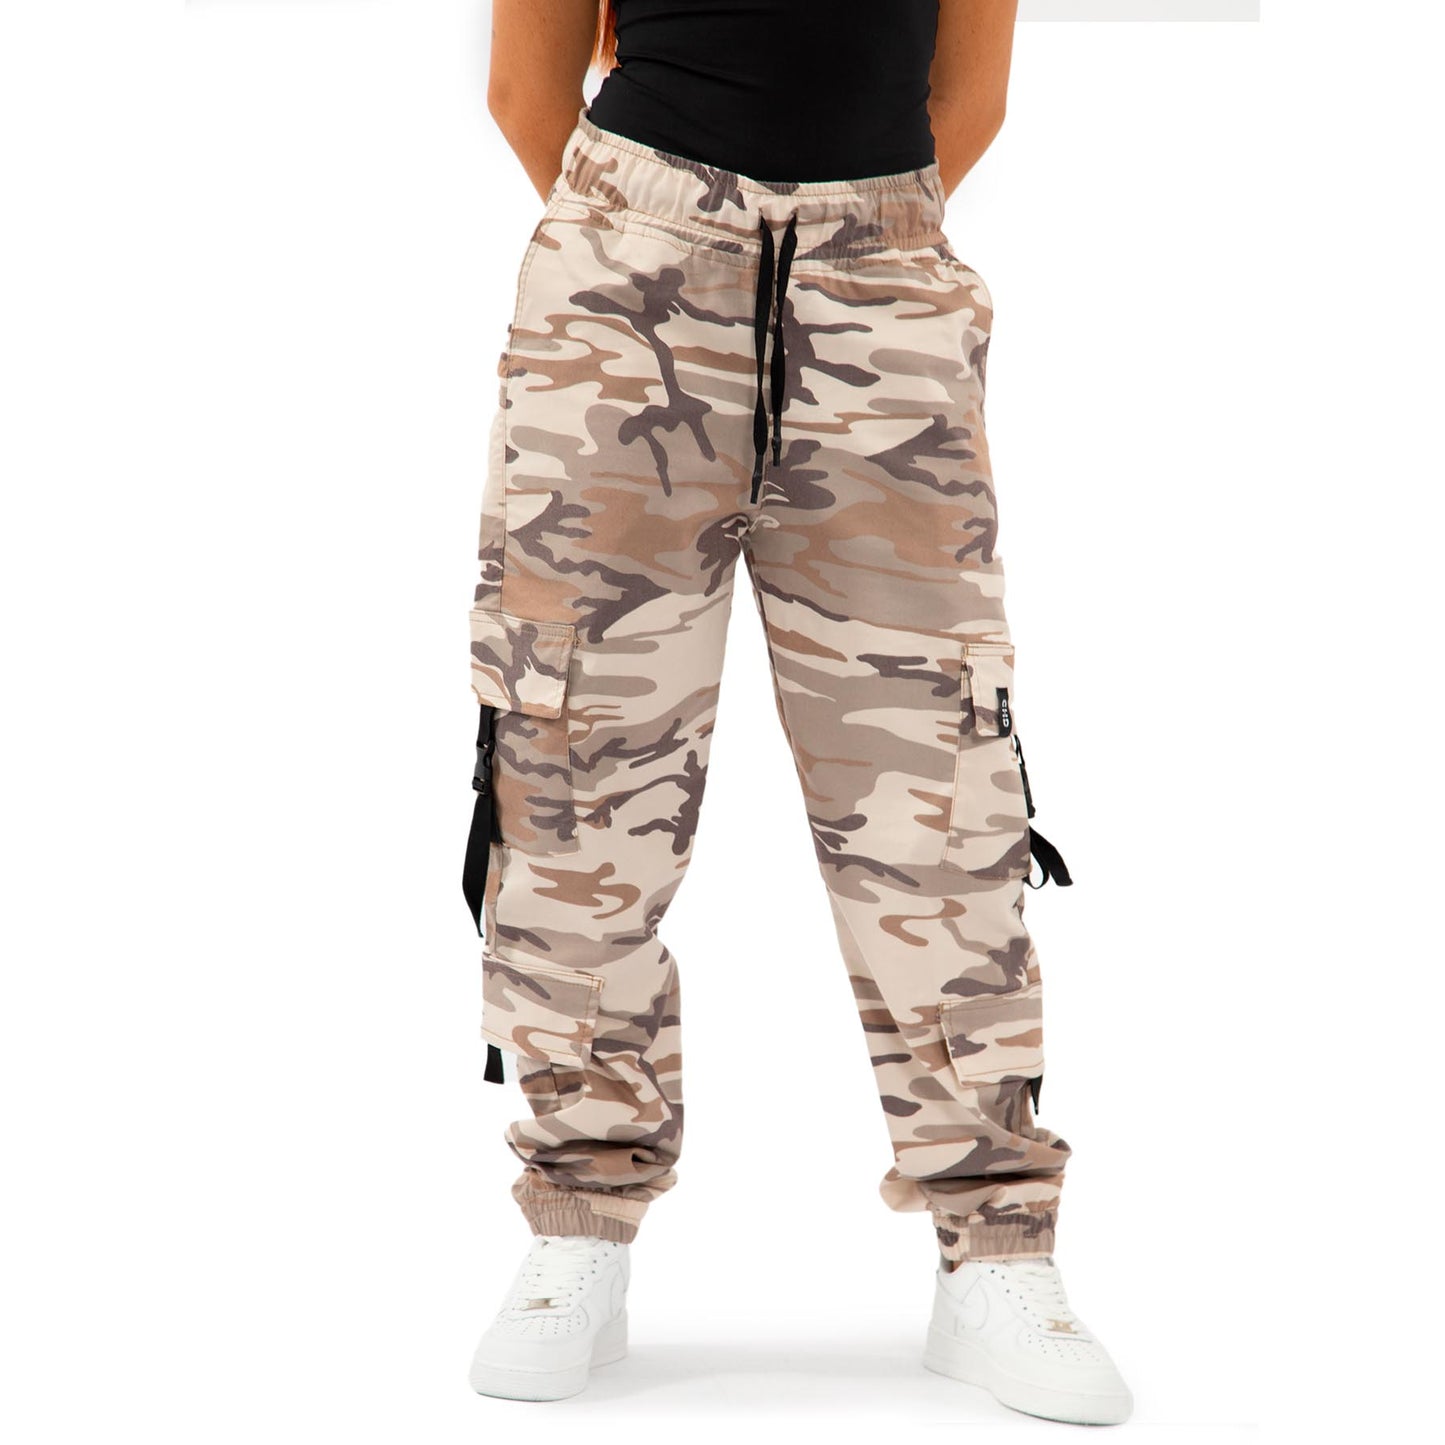 Wild cammo Double Cargo Pants Mujer color: KAKHI 8120